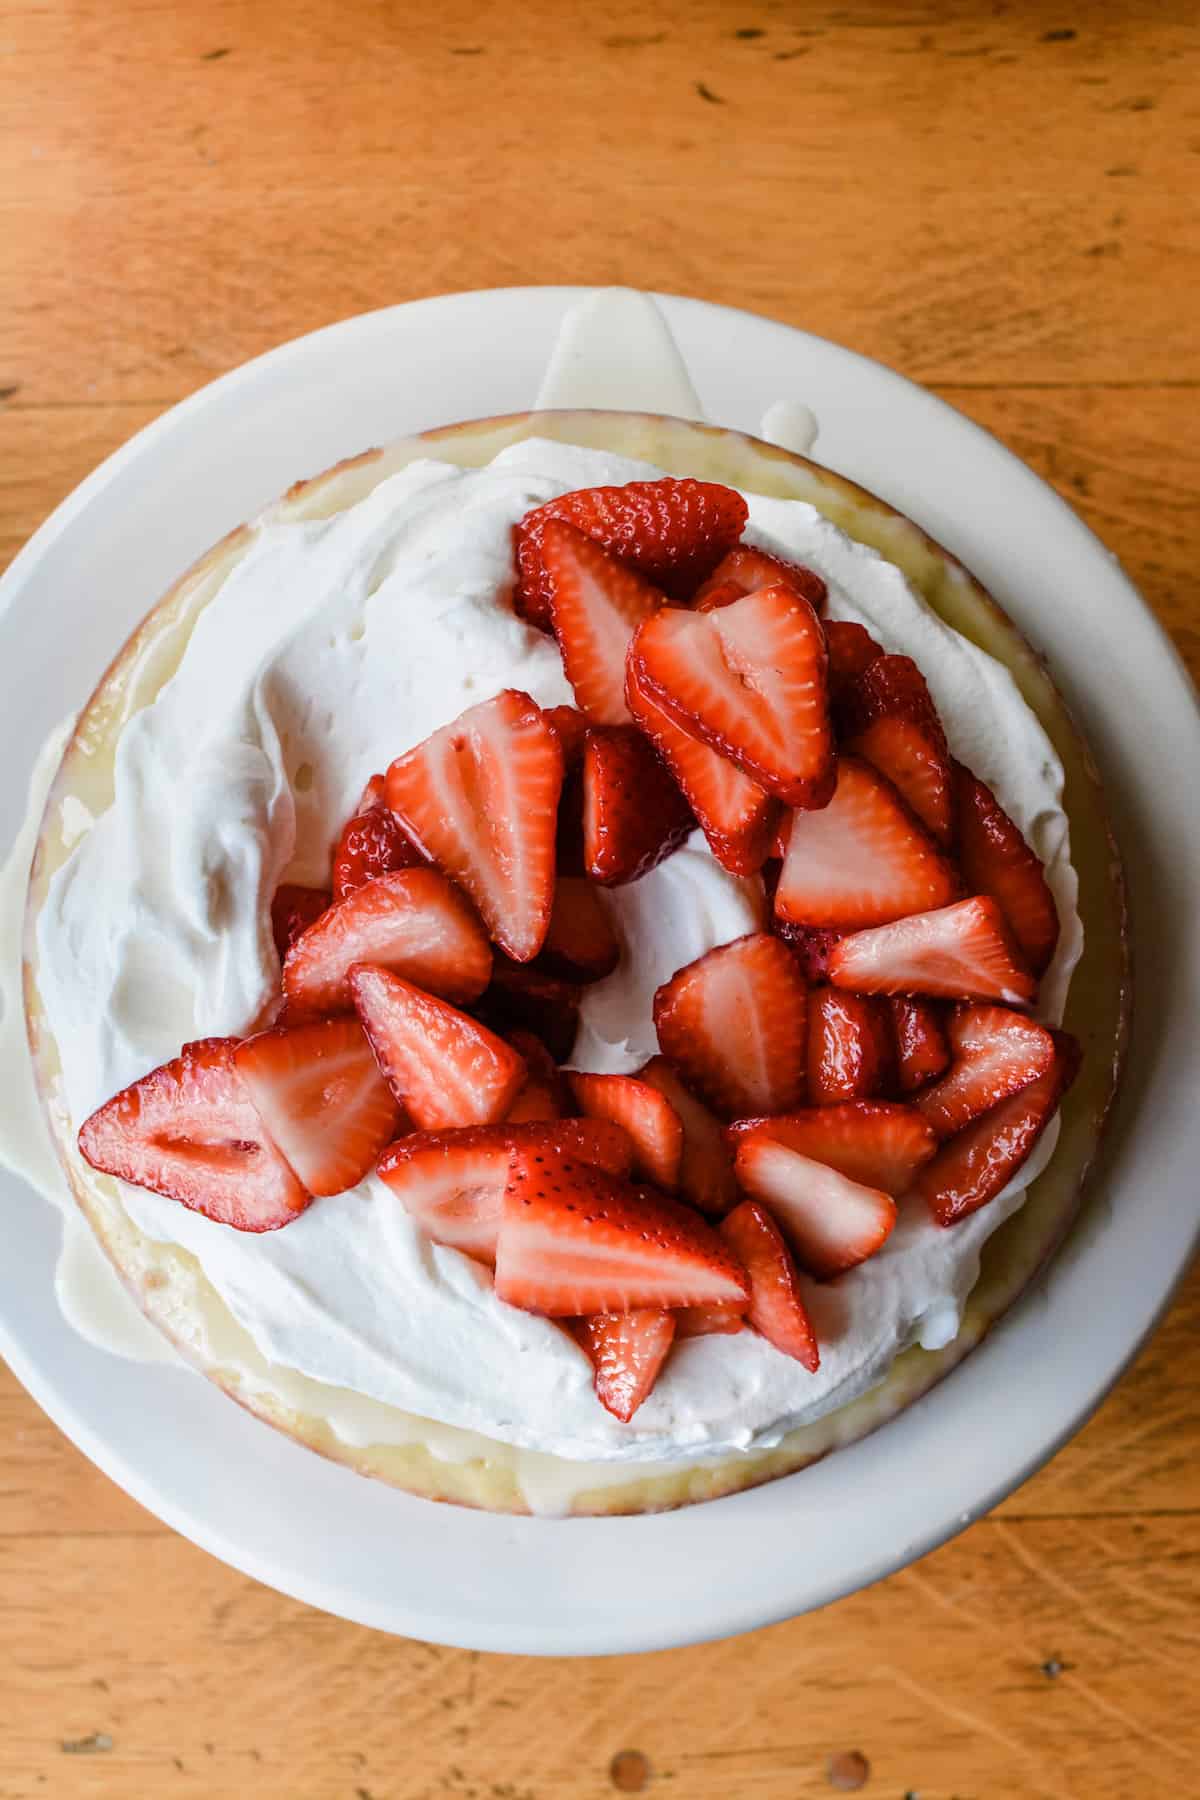 How to make a whole new take on strawberry shortcake! A Meyer lemon butter cake soaked in the classic tres leches cream and topped with juicy strawberries. #strawberryshortcake #meyerlemon #treslechescake #strawberryshortcakerecipe